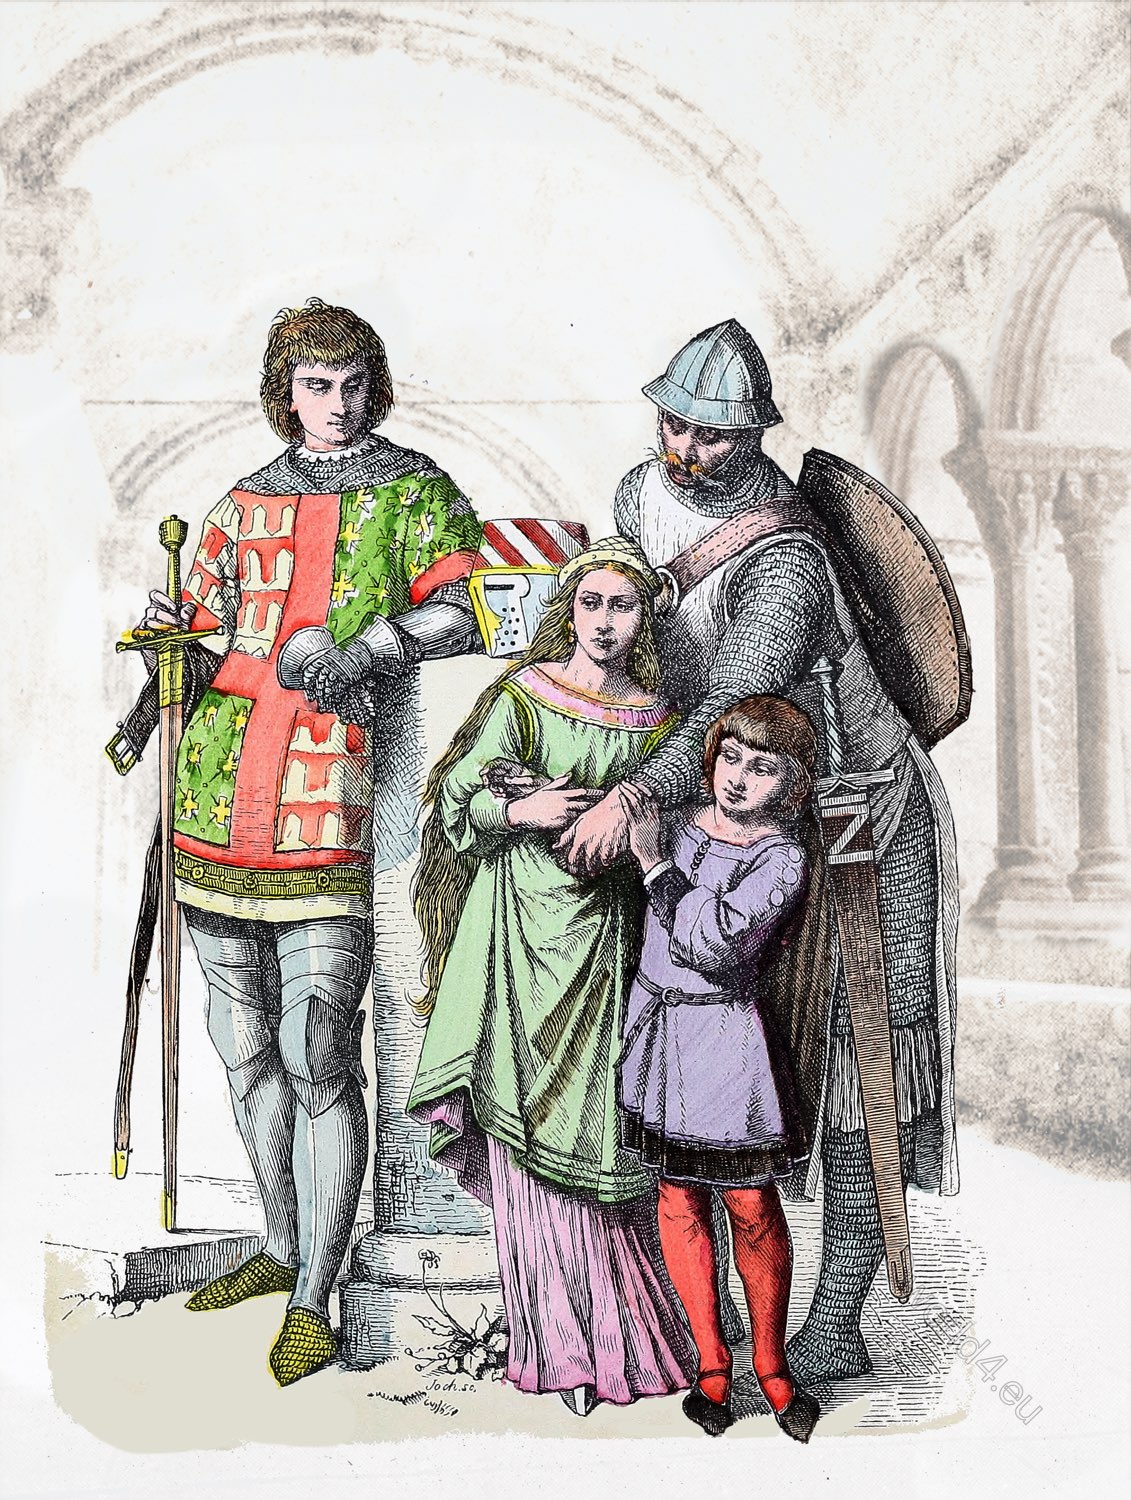 German, Knights, Family, Middle ages, costumes, 13th century